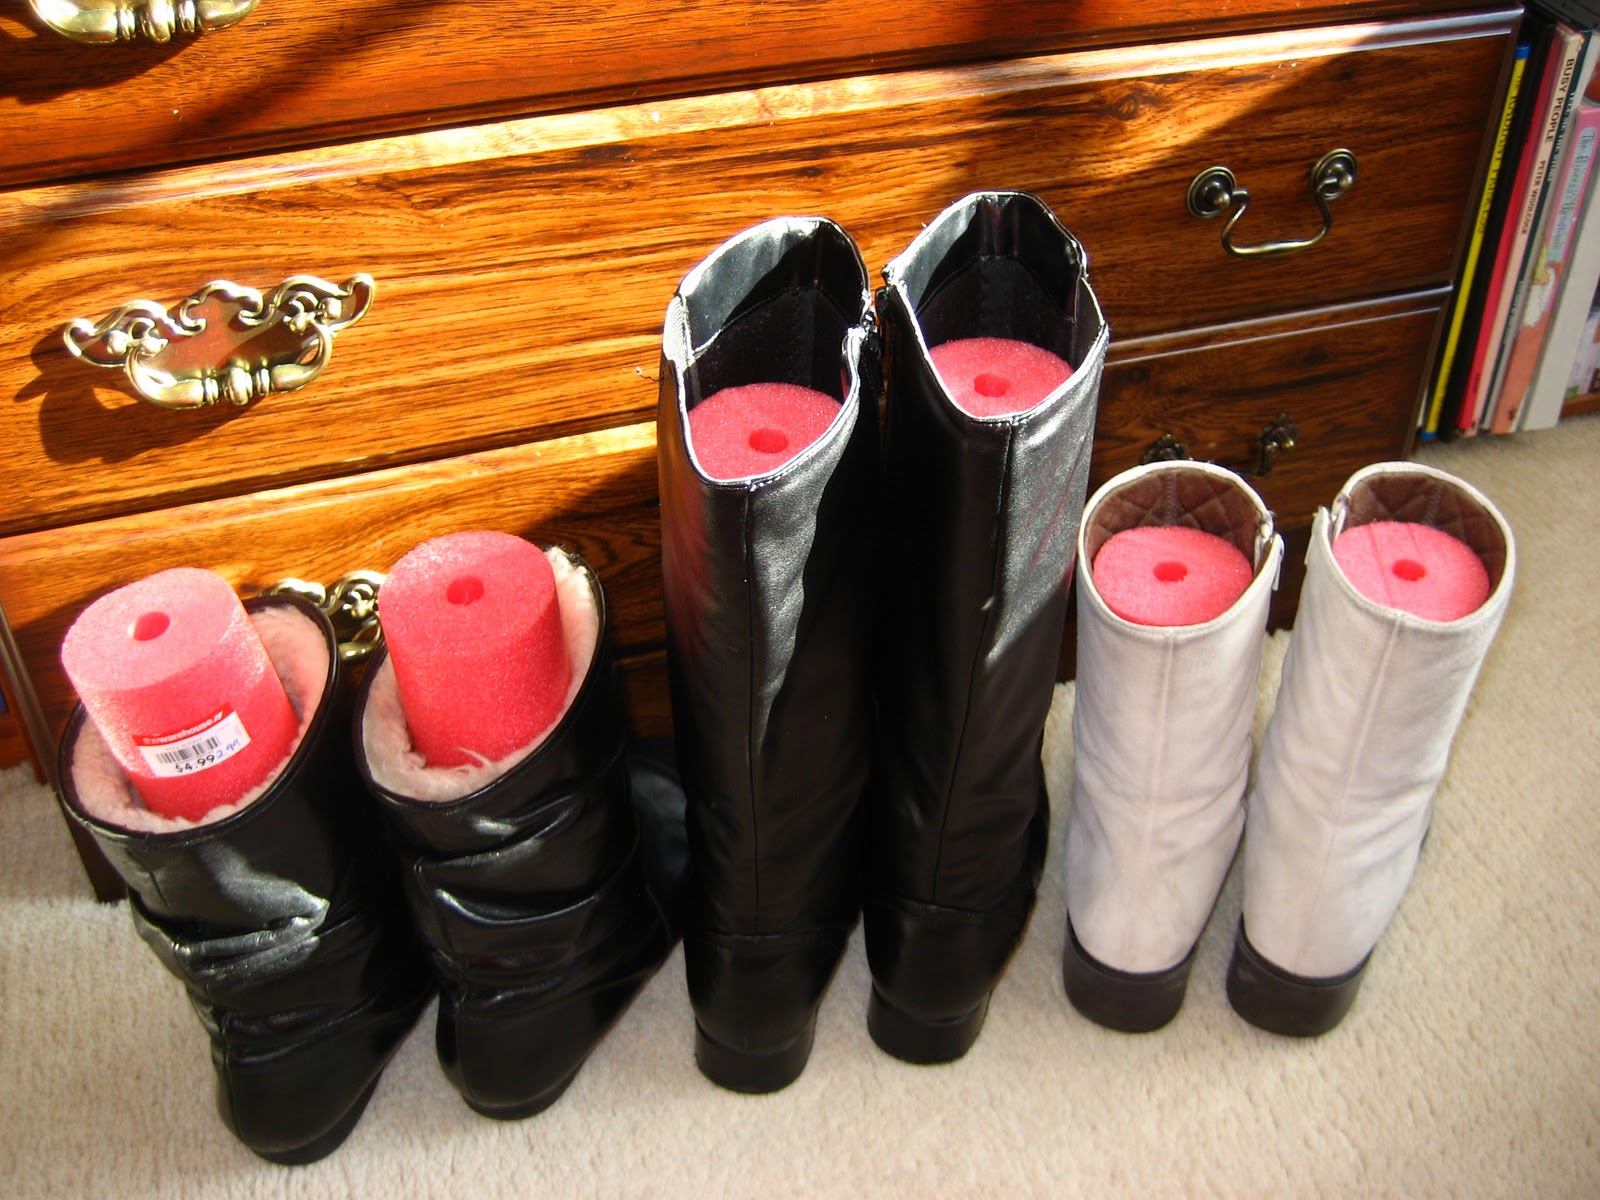 Foam Pool Noodles to Save Your Boots on the Cheap